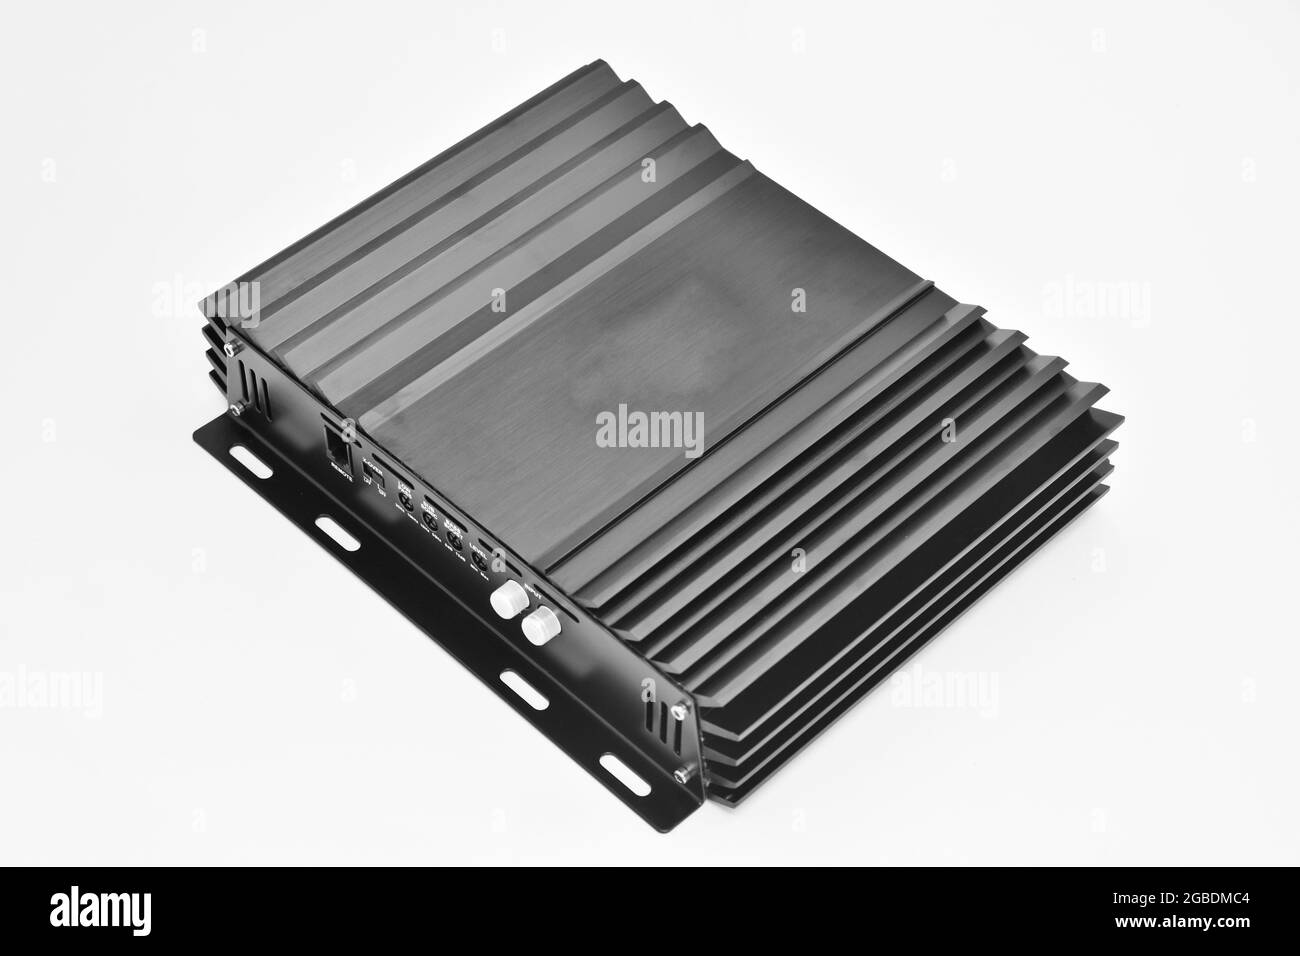 Car Amplifier Isolated On White Background With Clipping Path, Audio Equipment Stock Photo